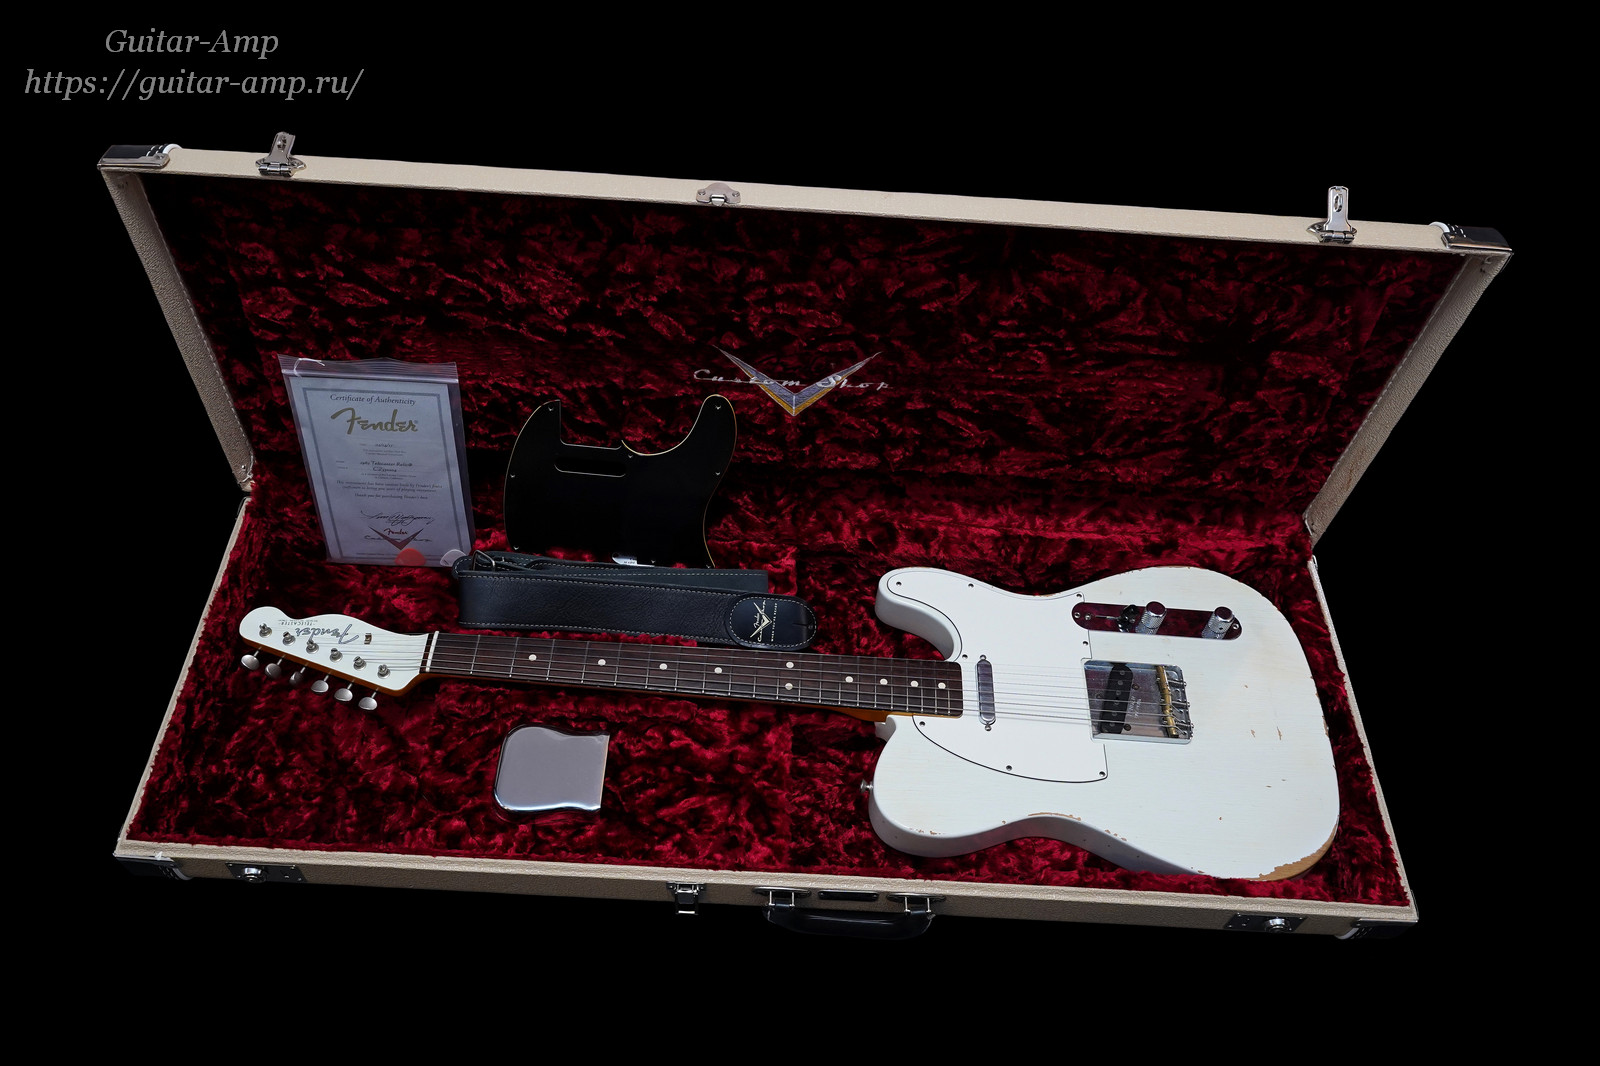 Fender Custom Shop Telecaster 1963 Limited Edition 30th Ann CME Special Run Aged White Relic 2017 22_x1600.jpg